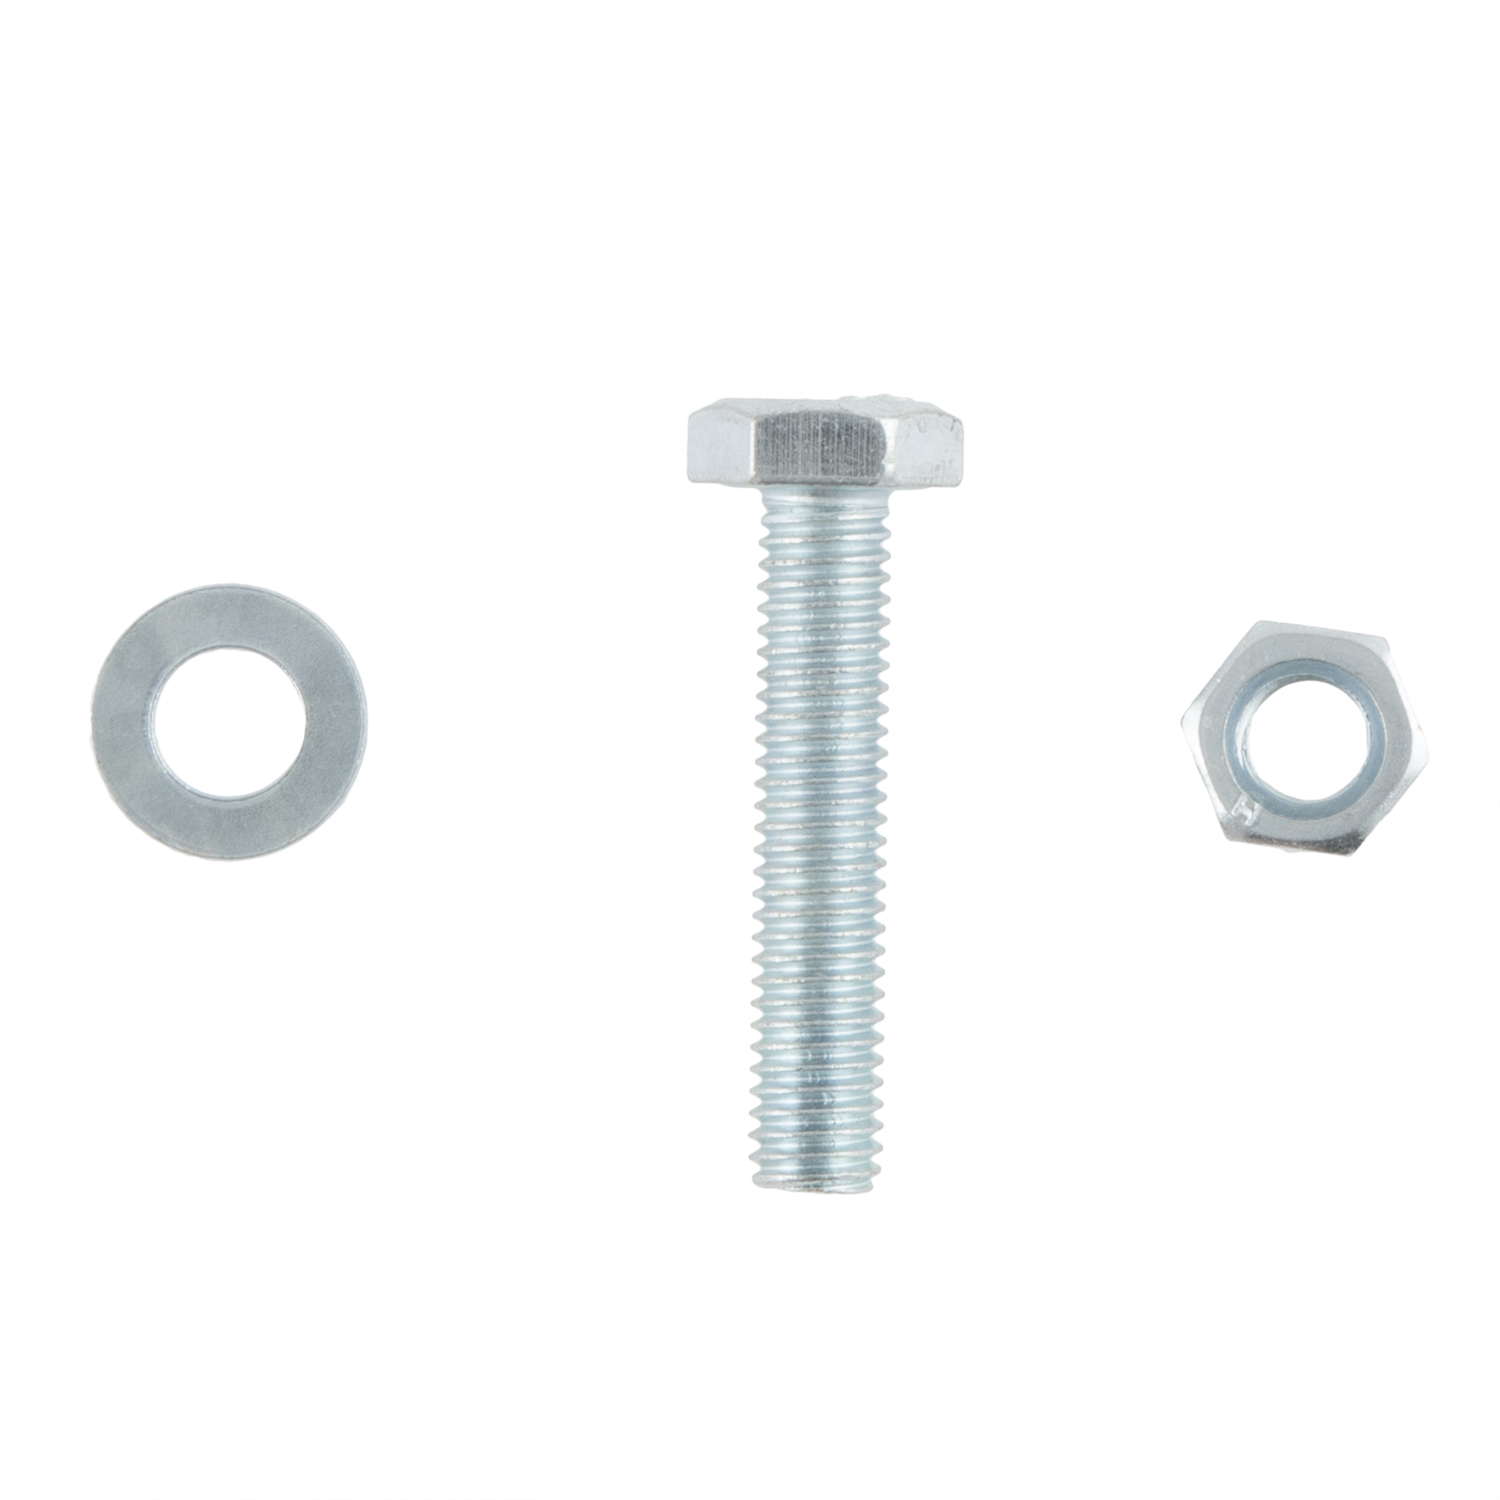 Hiatt M8 x 40mm Hex Bolt Nut and Washer 10 Pack Image 2